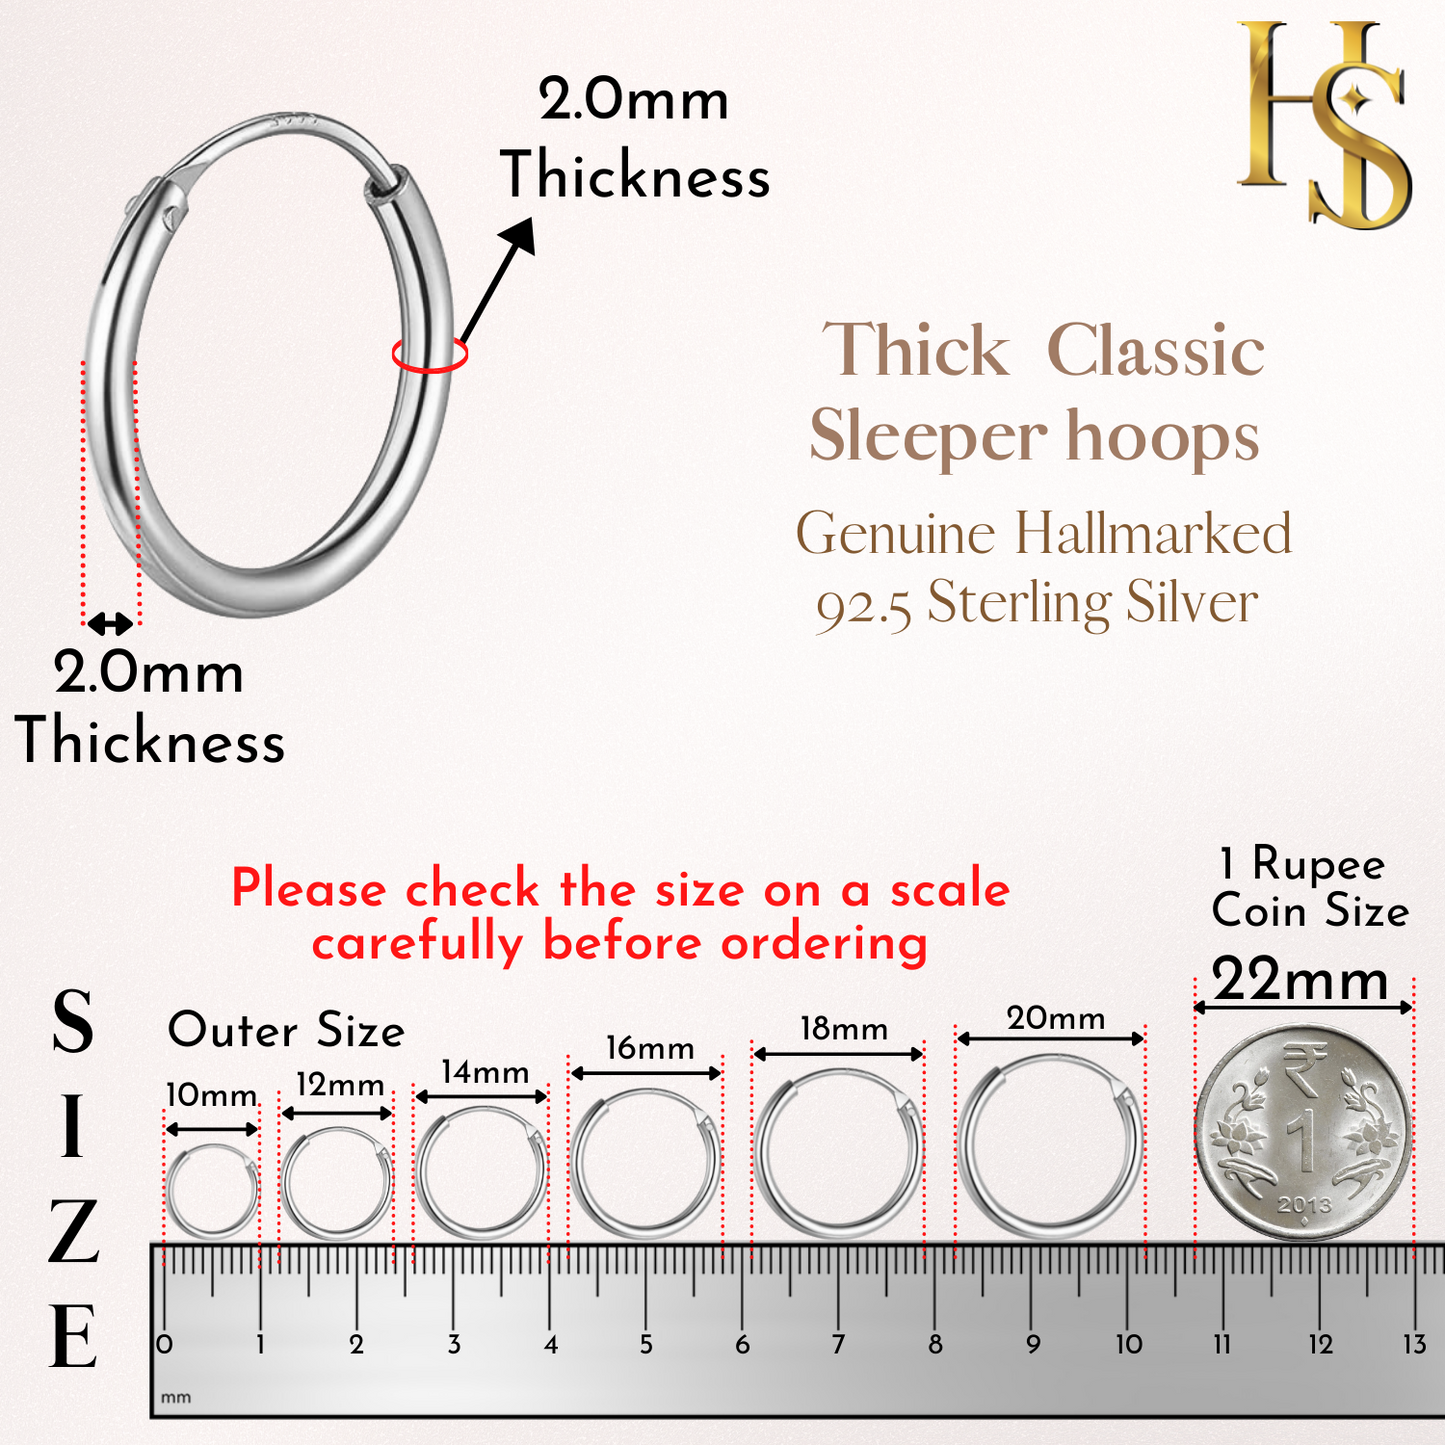 Thick Hoop Earrings in 92.5 Sterling Silver - Round Classic Hoop - Sizes 12mm to 20mm